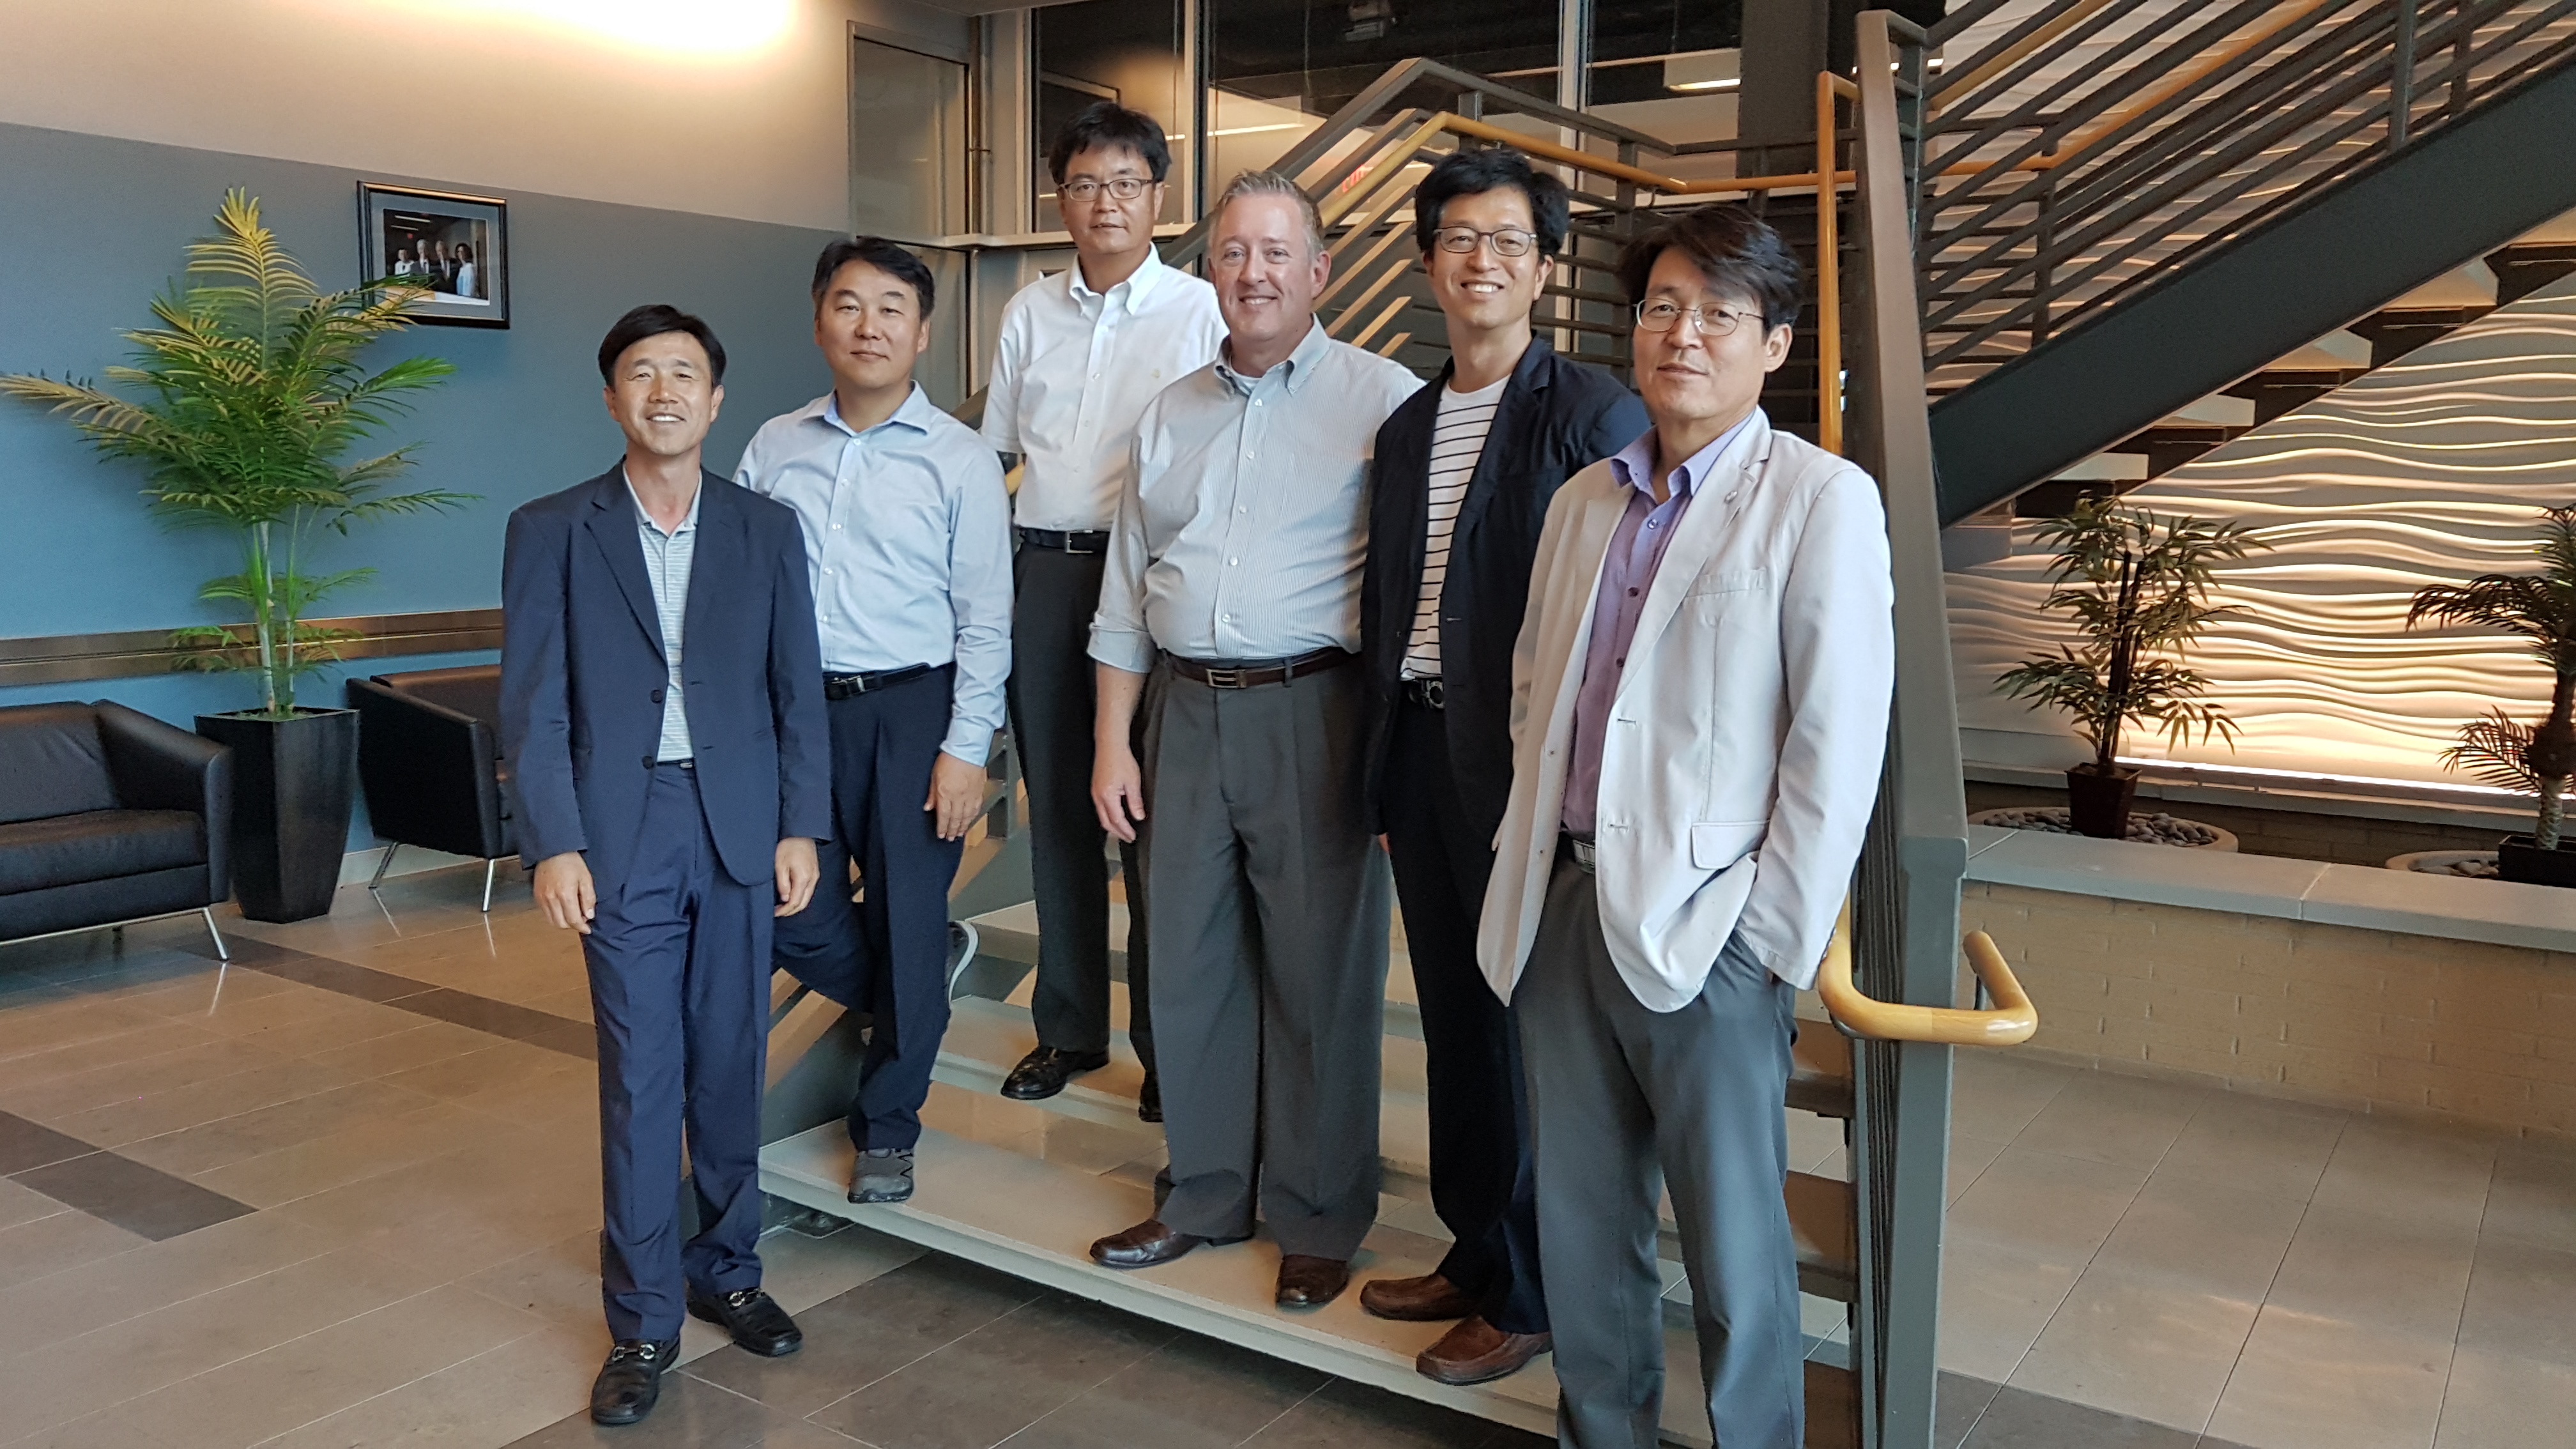 Curt Davis with the team from Korean  Nuclear Power he trained in PM and BA at SUNY Stony Brook